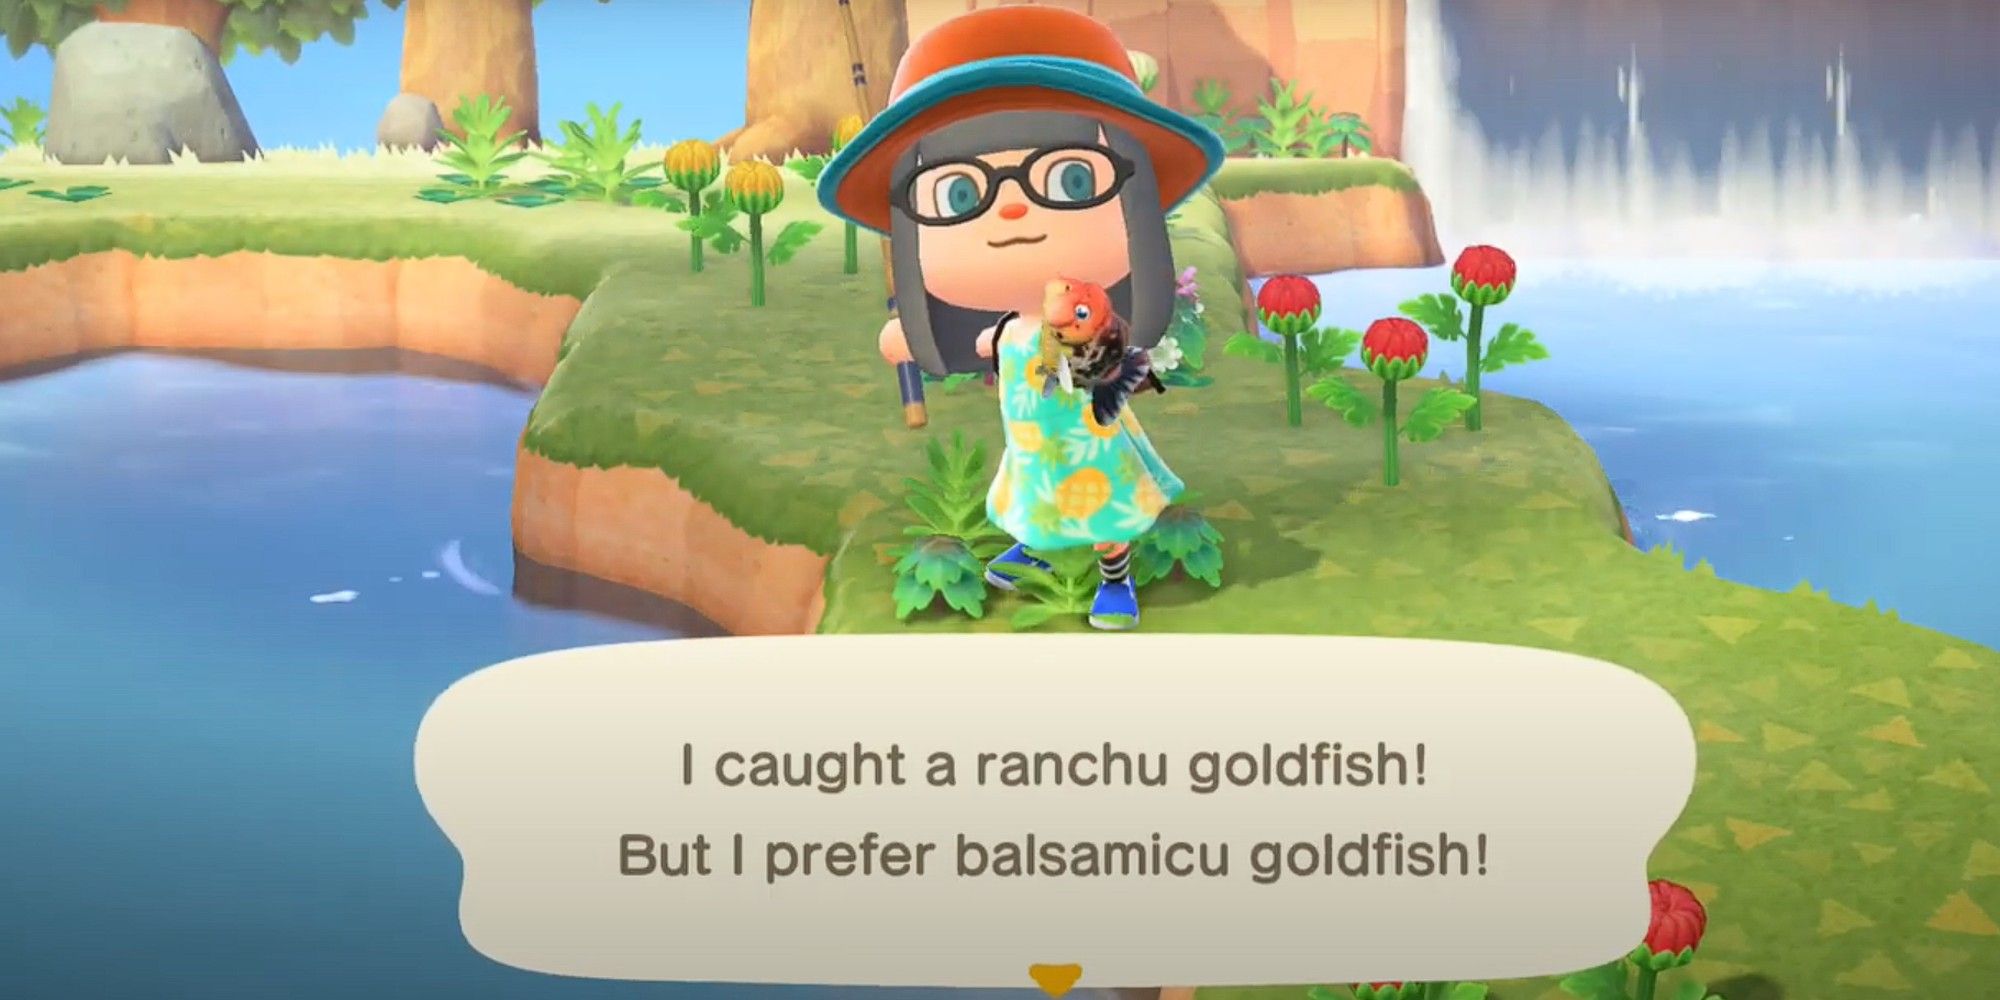 A player catches the Ranchu Goldfish in Animal Crossing: New Horizons